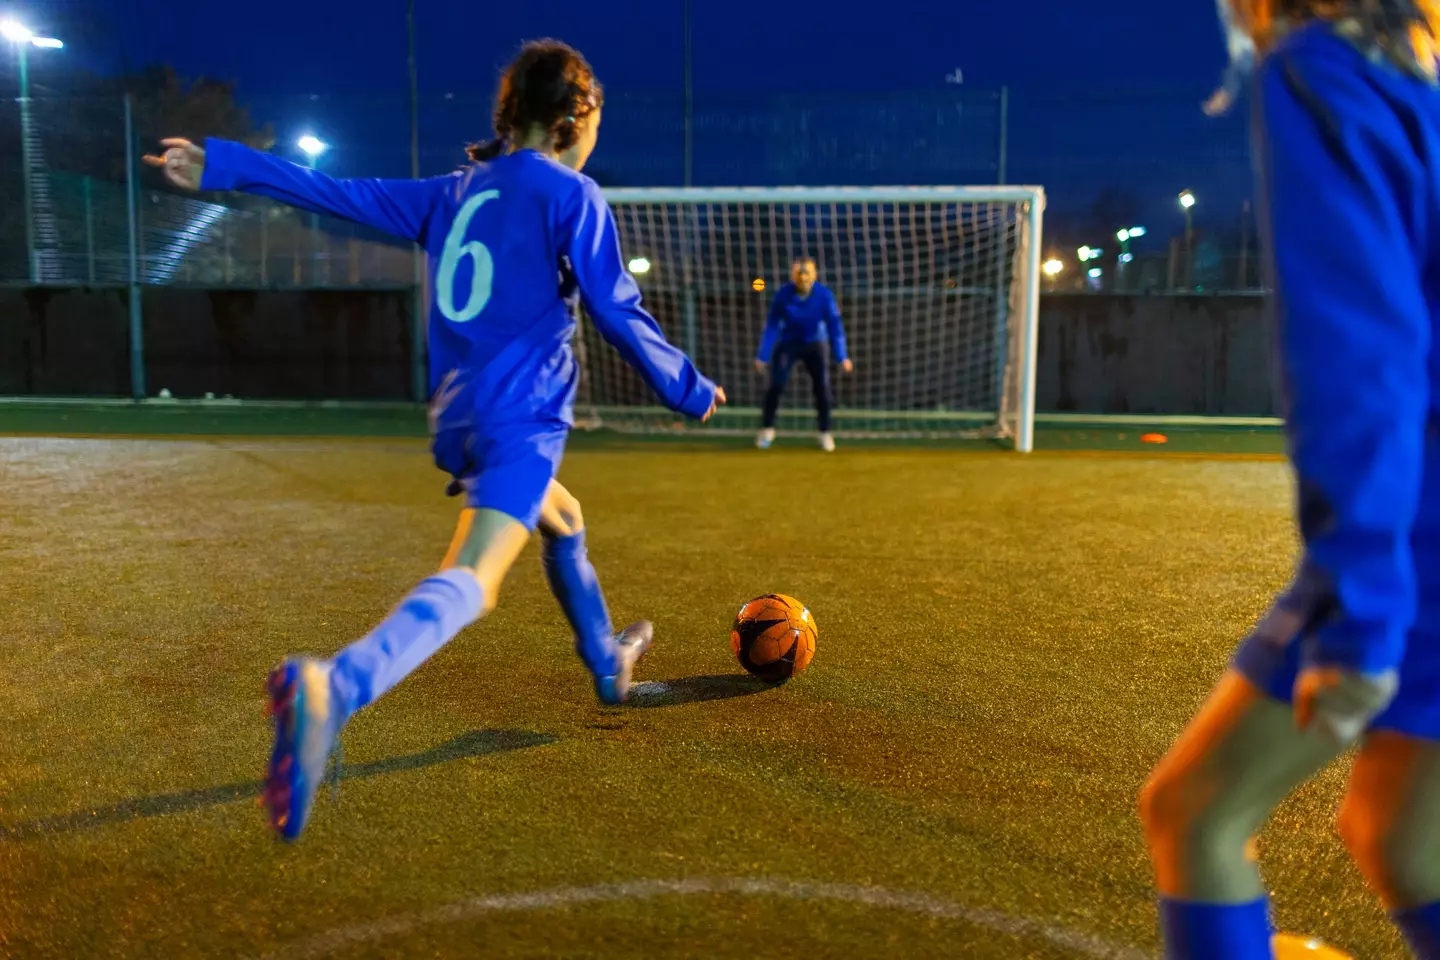 Football sessions for girls are on the rise.